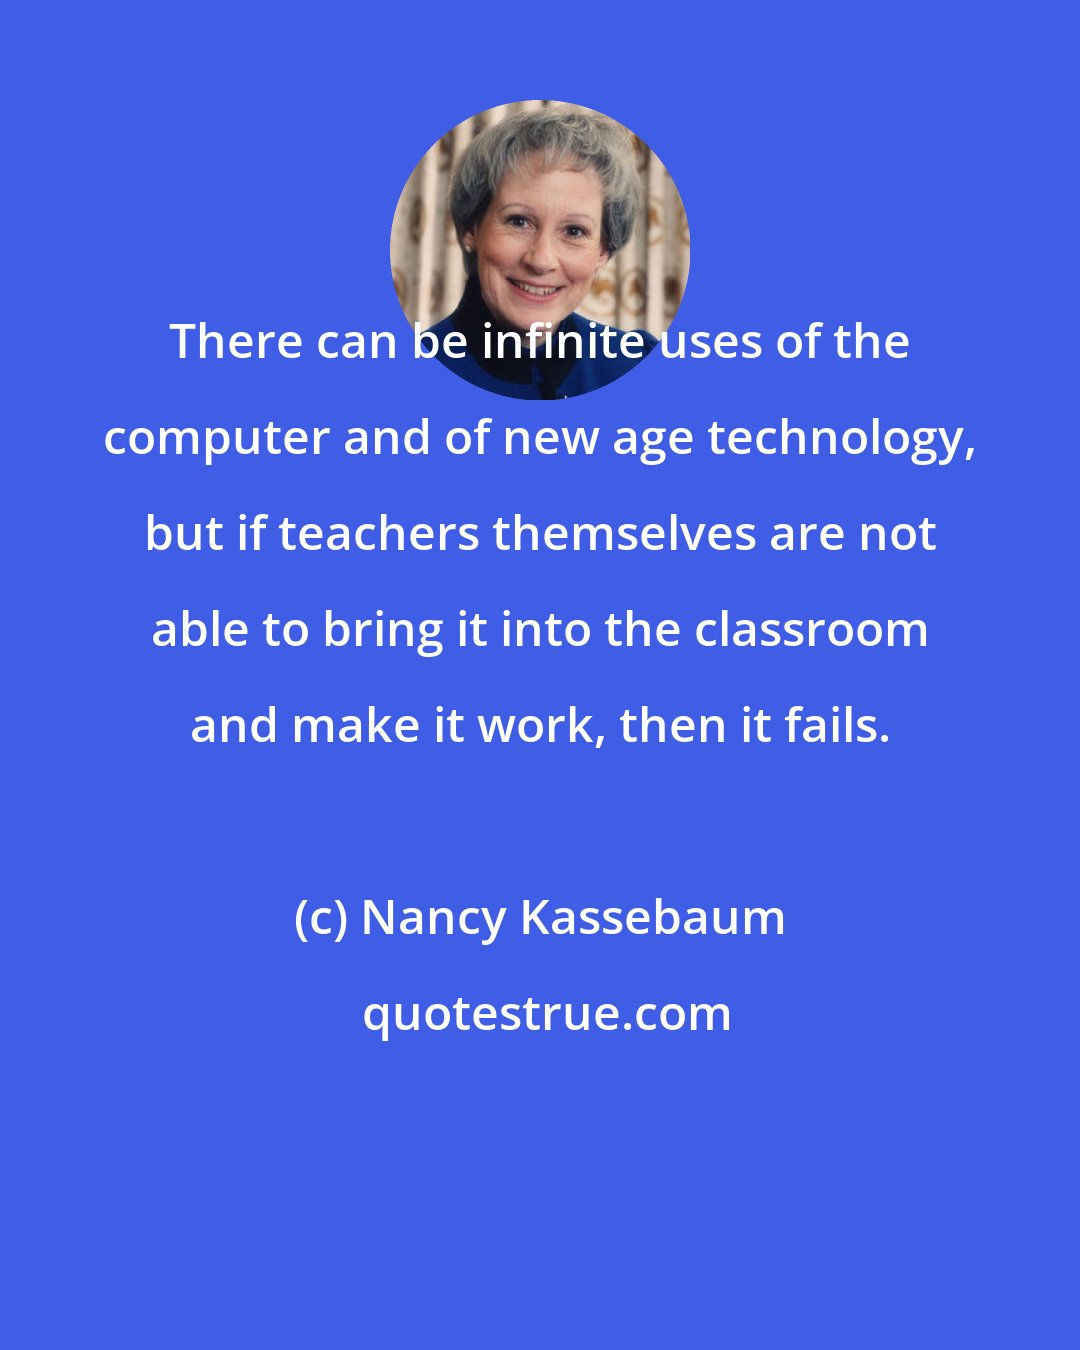 Nancy Kassebaum: There can be infinite uses of the computer and of new age technology, but if teachers themselves are not able to bring it into the classroom and make it work, then it fails.